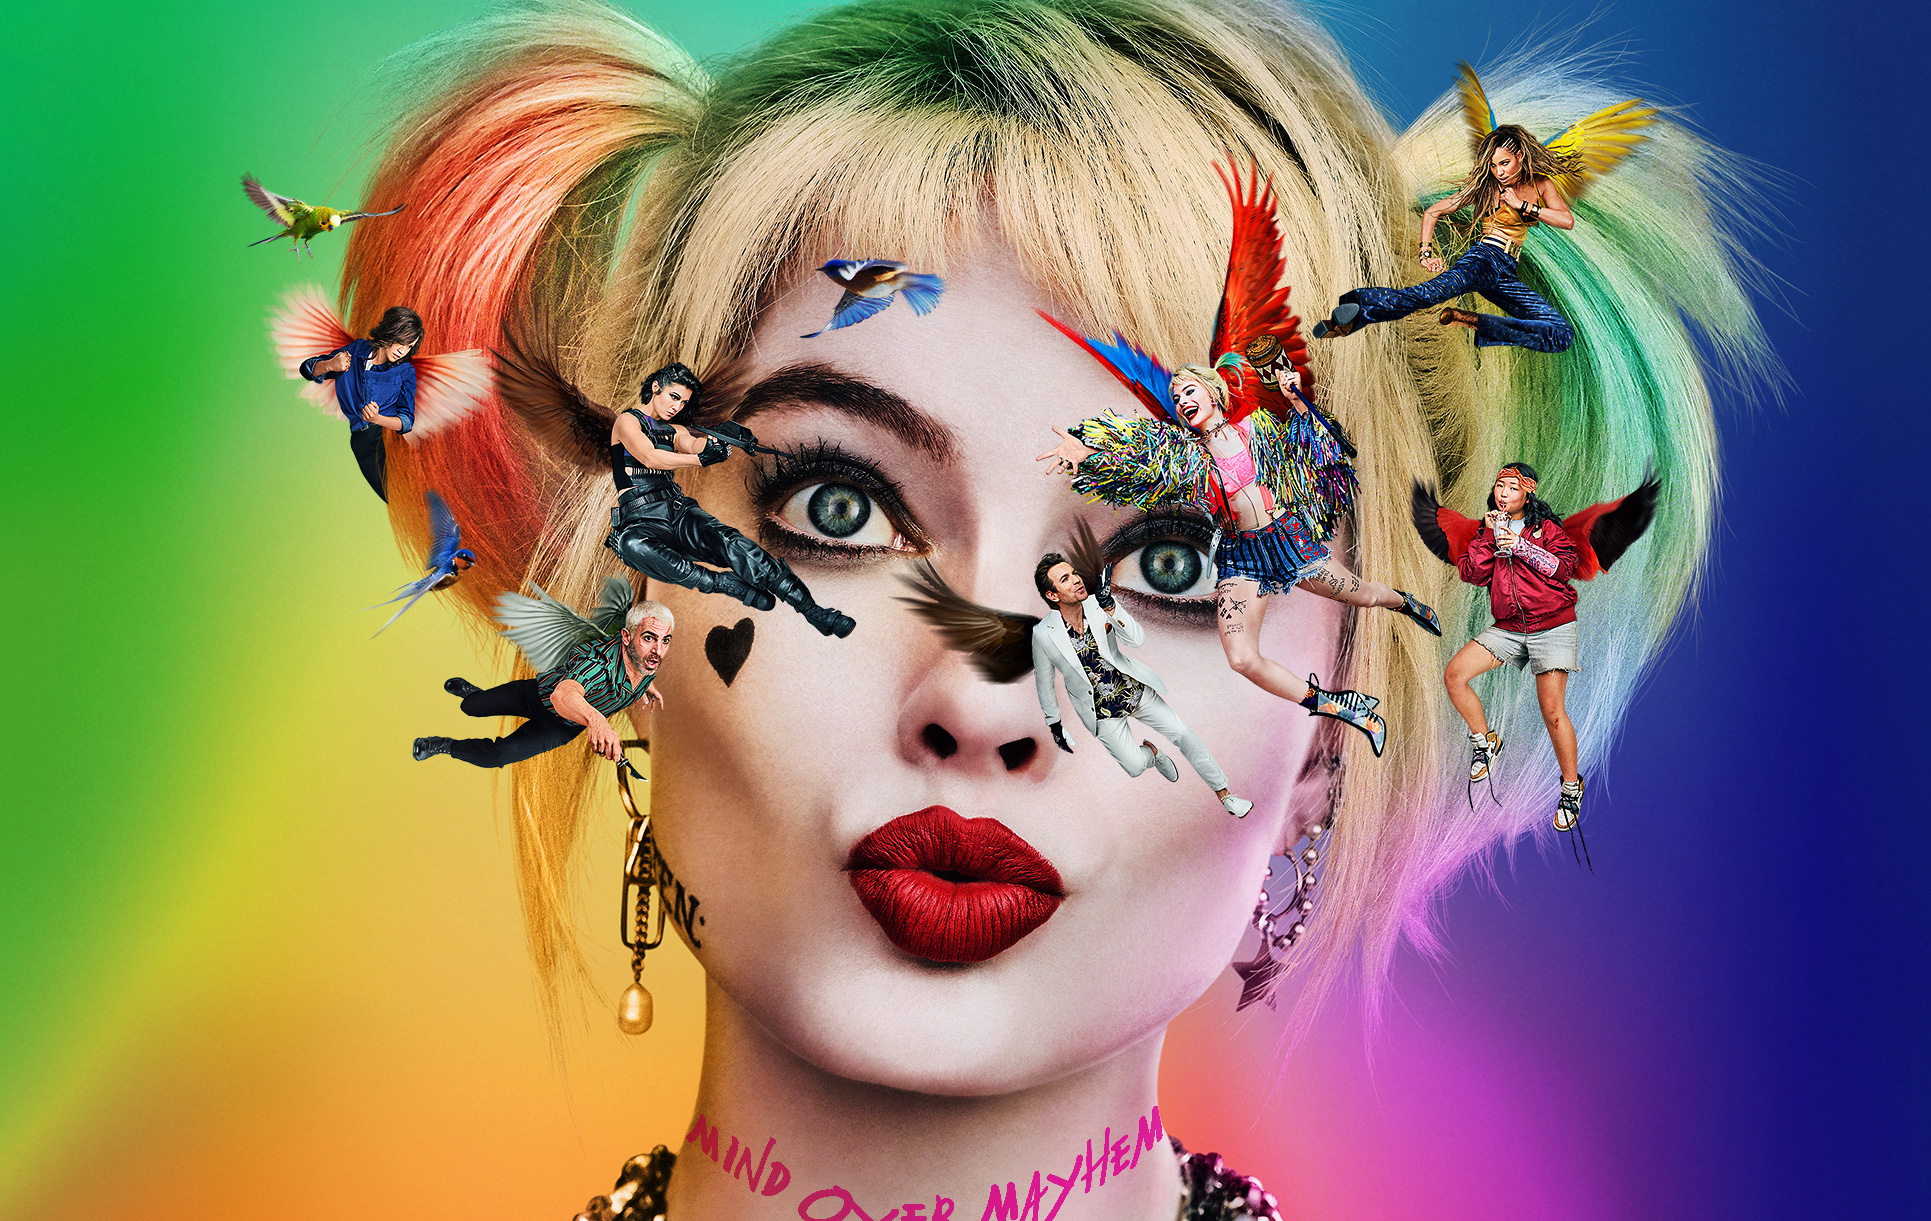 Birds of Prey poster delves into Harley Quinn's twisted mind